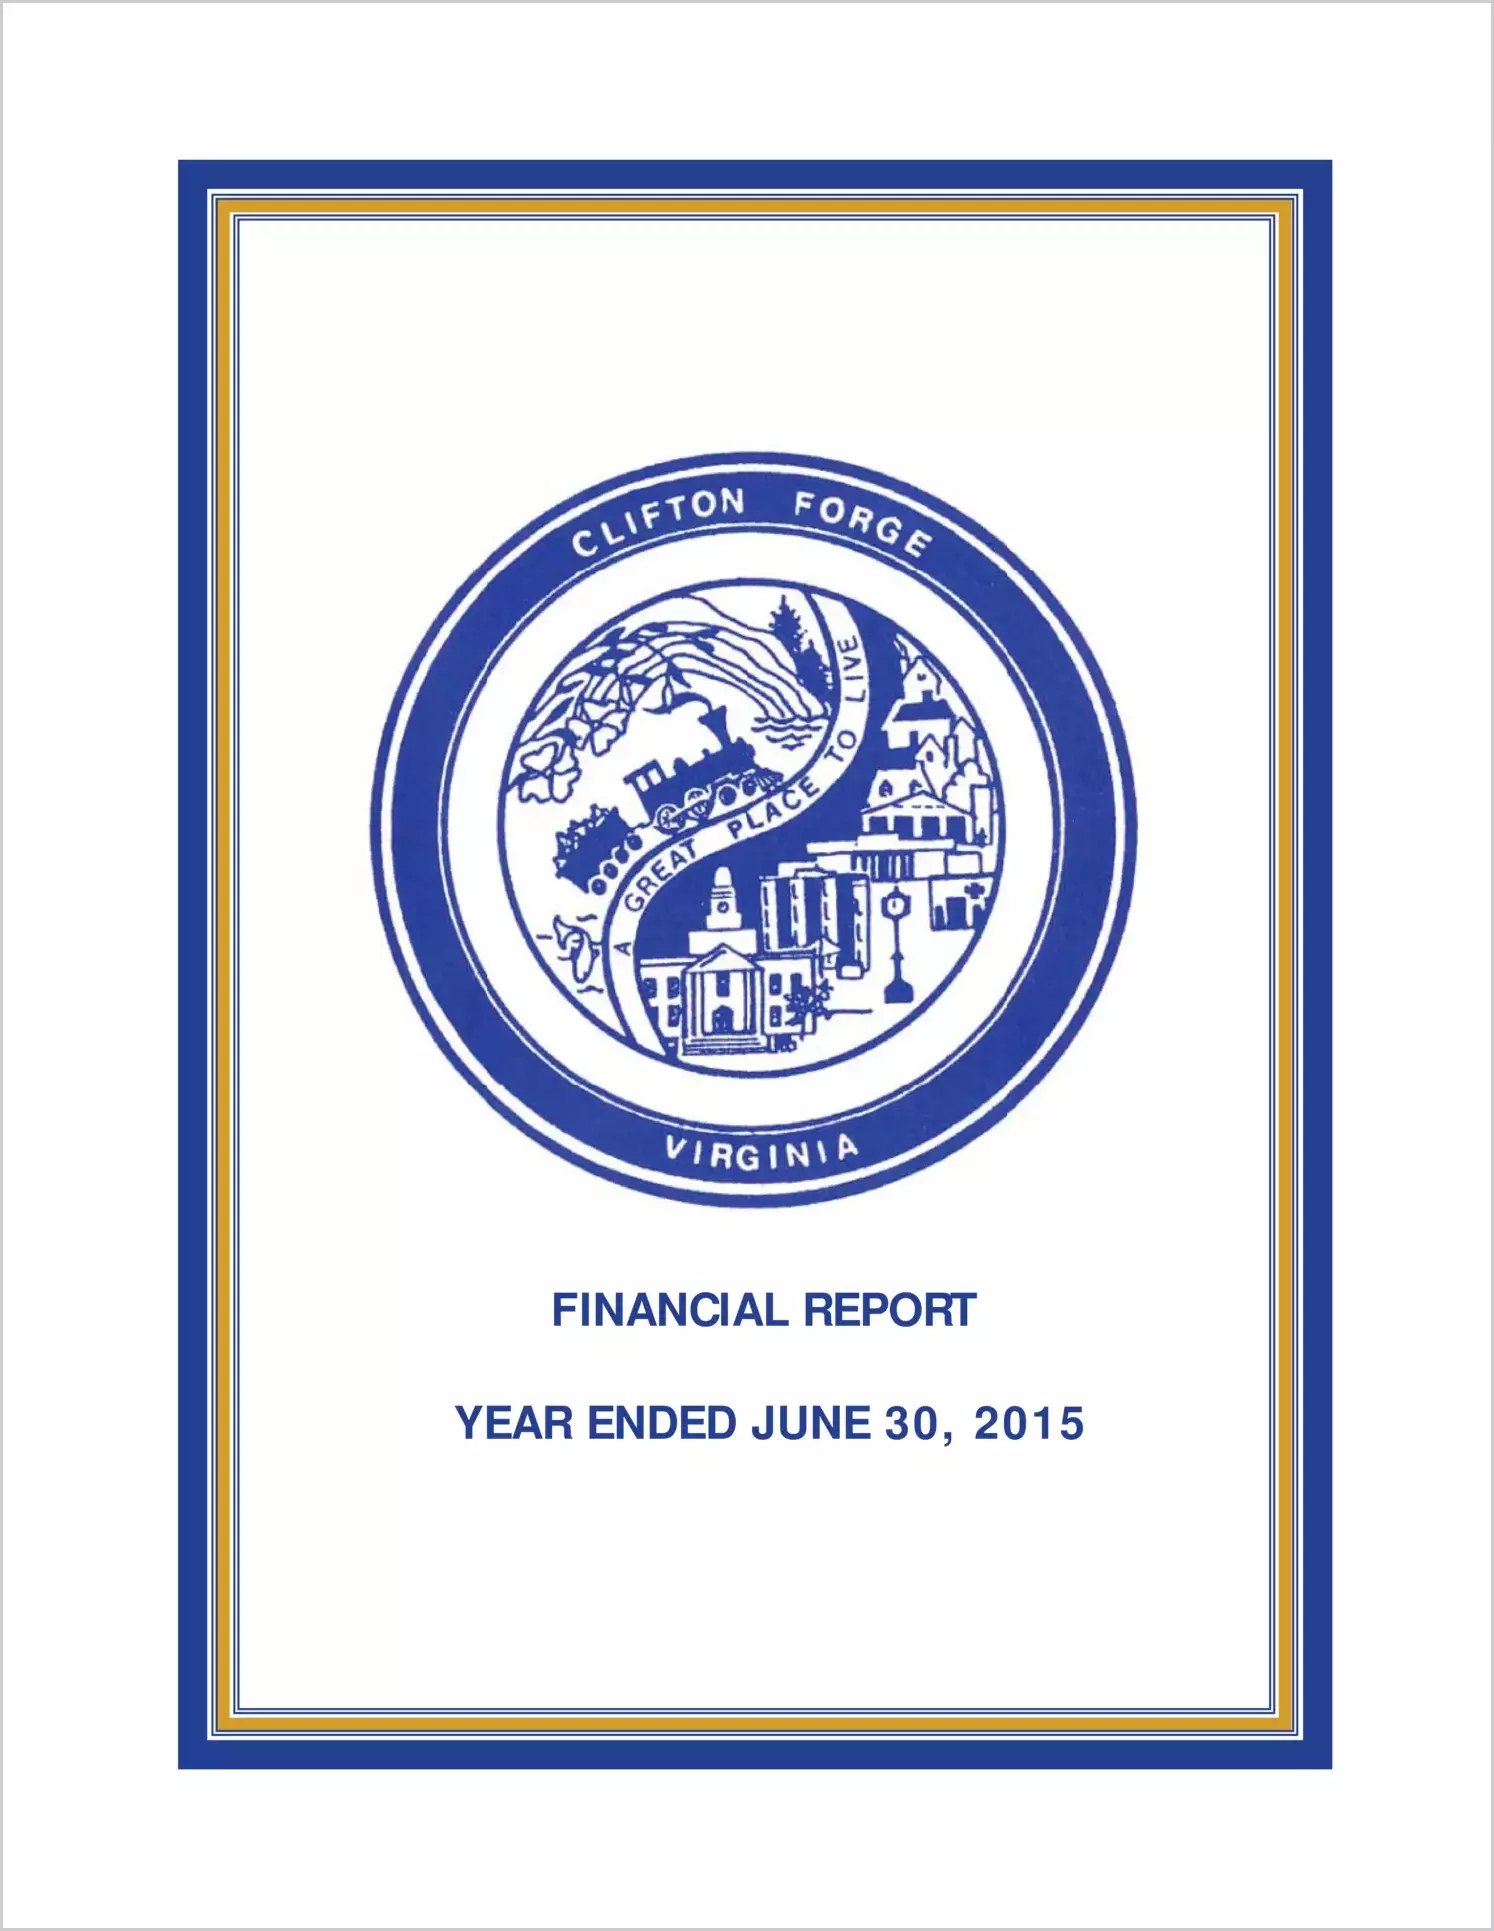 2015 Annual Financial Report for Town of Clifton Forge